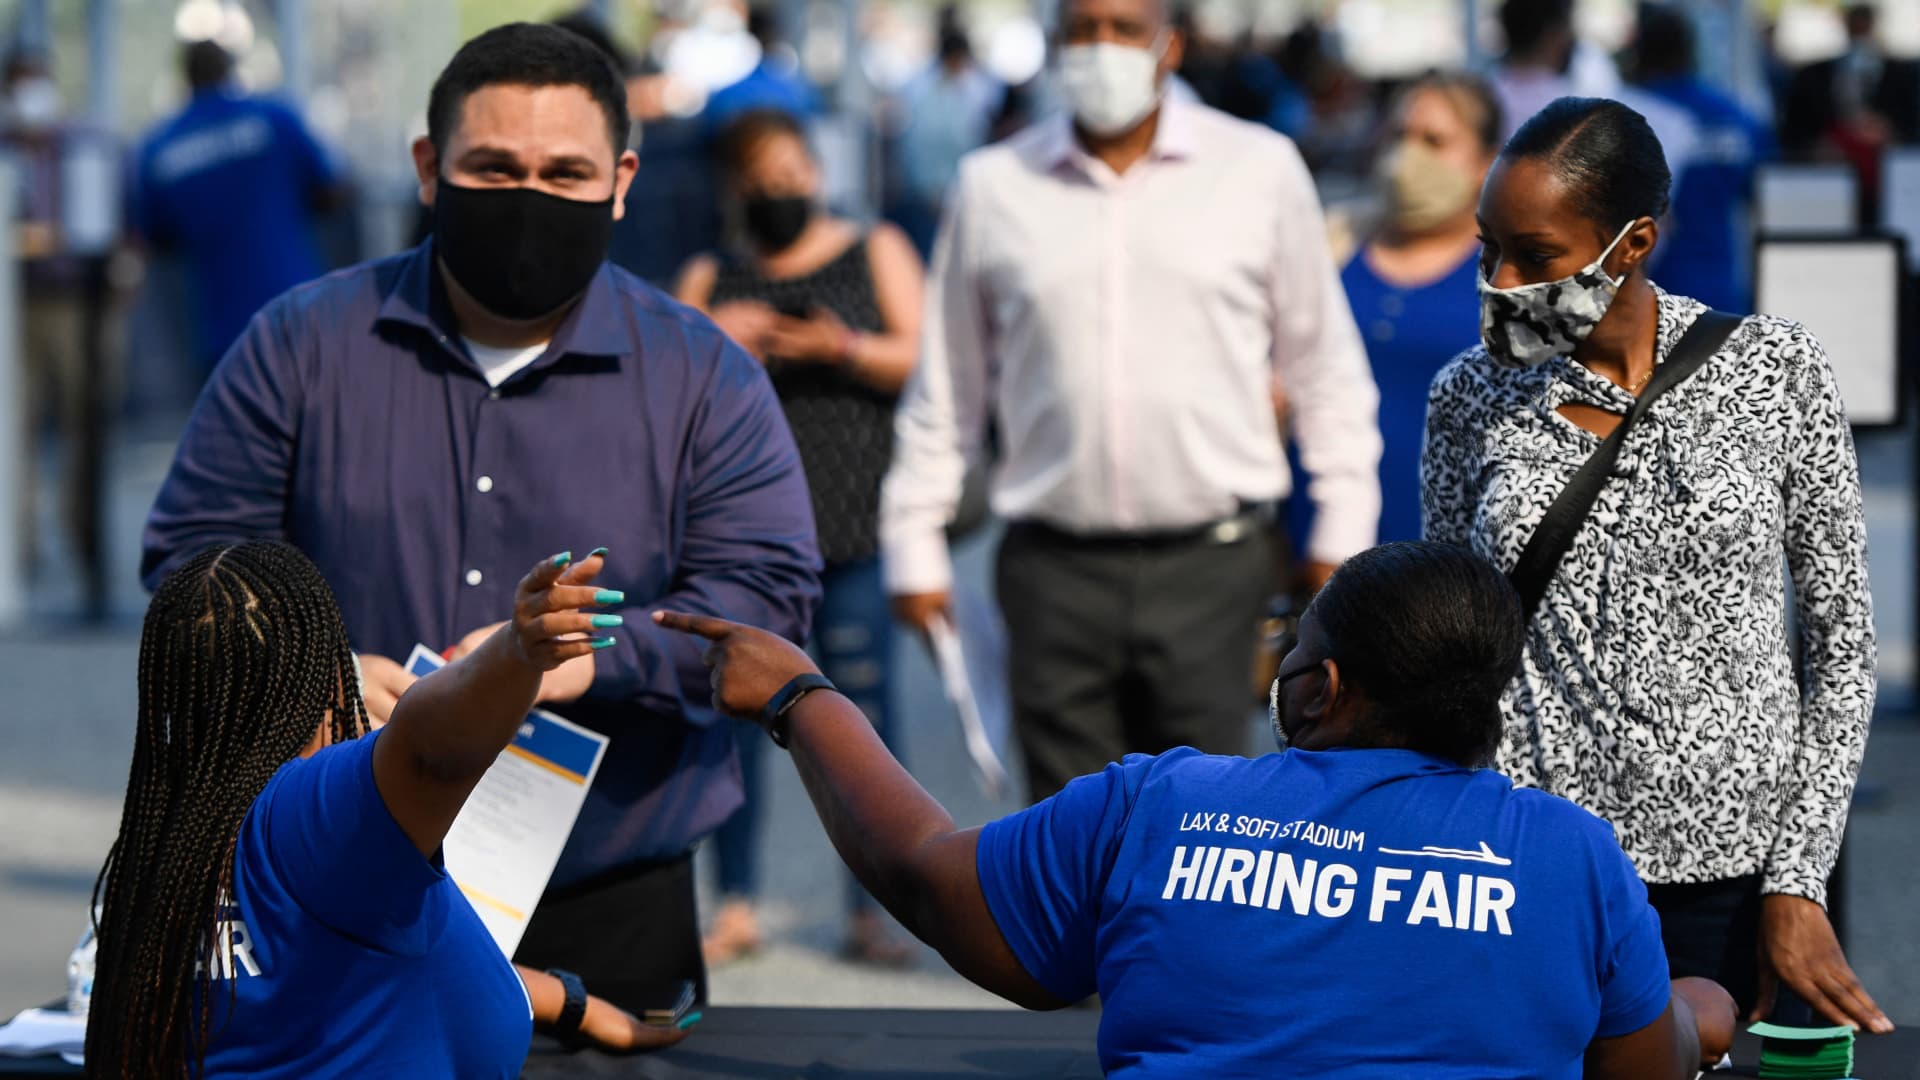 People receive information as they attend a job fair at SoFi Stadium on Sept. 9, 2021, in Inglewood, California.